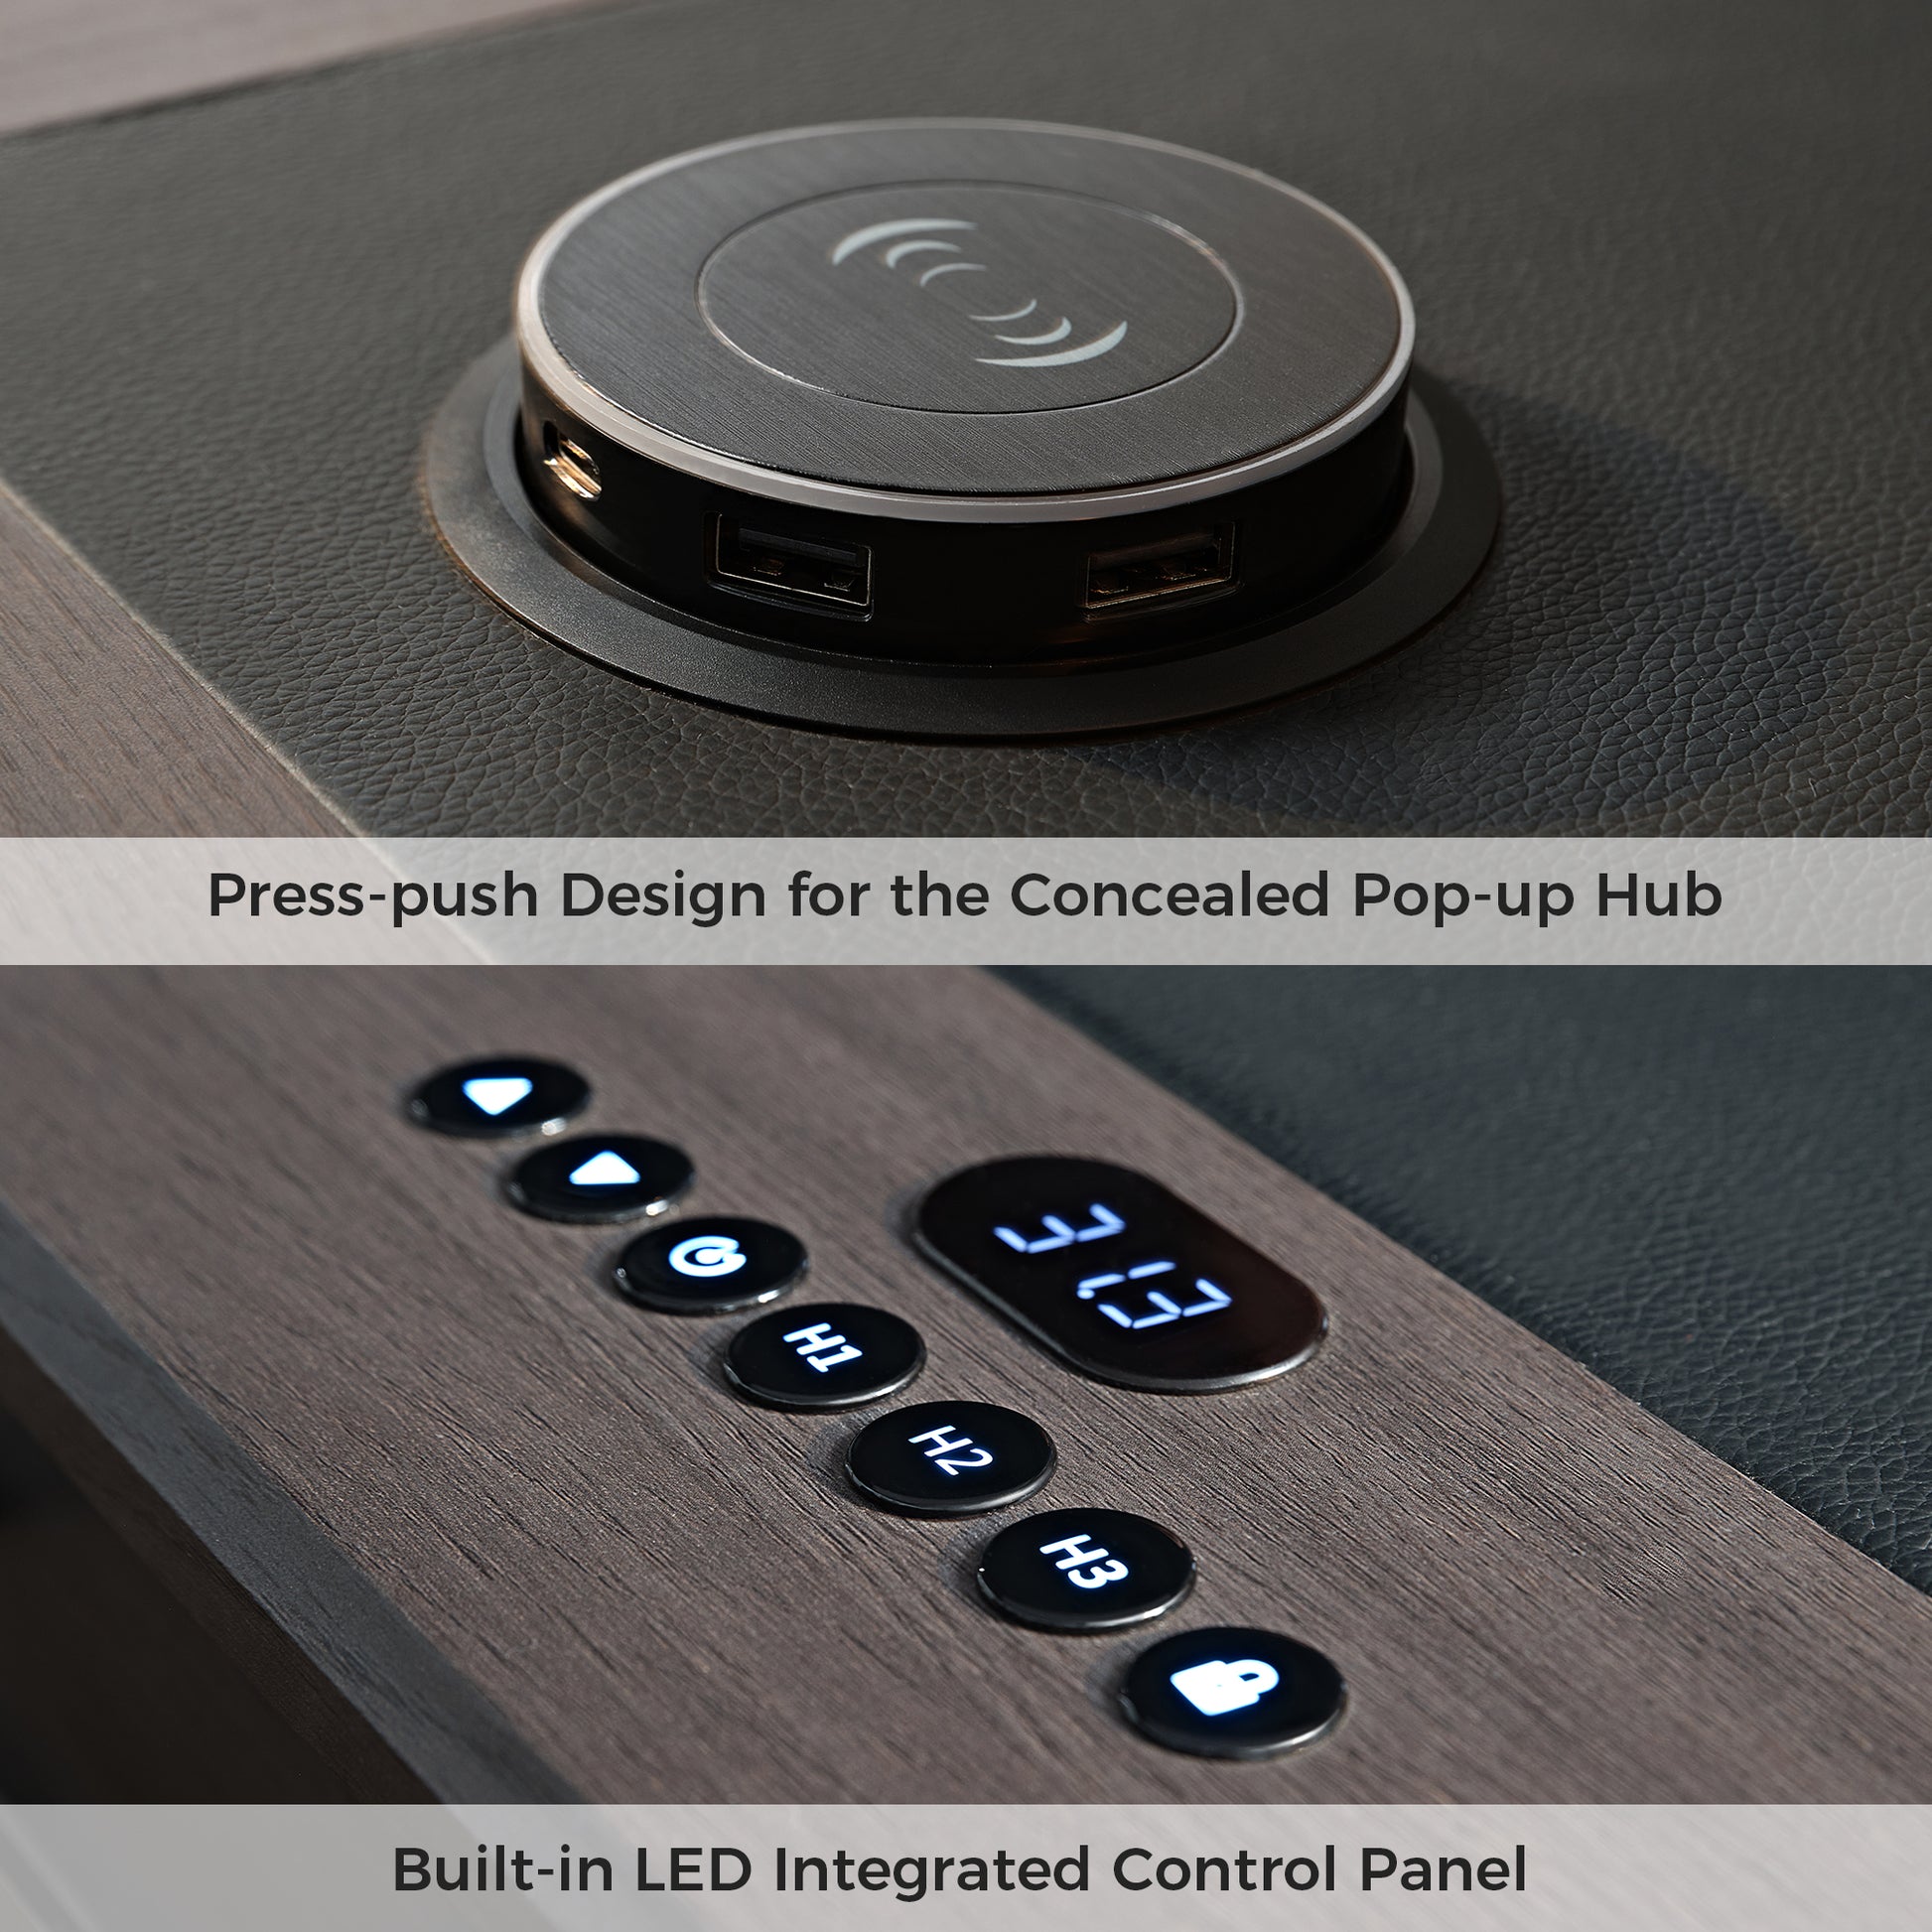 Push-up Hub with USB A and Wireless Qi Charging with Inset Charging and Controls